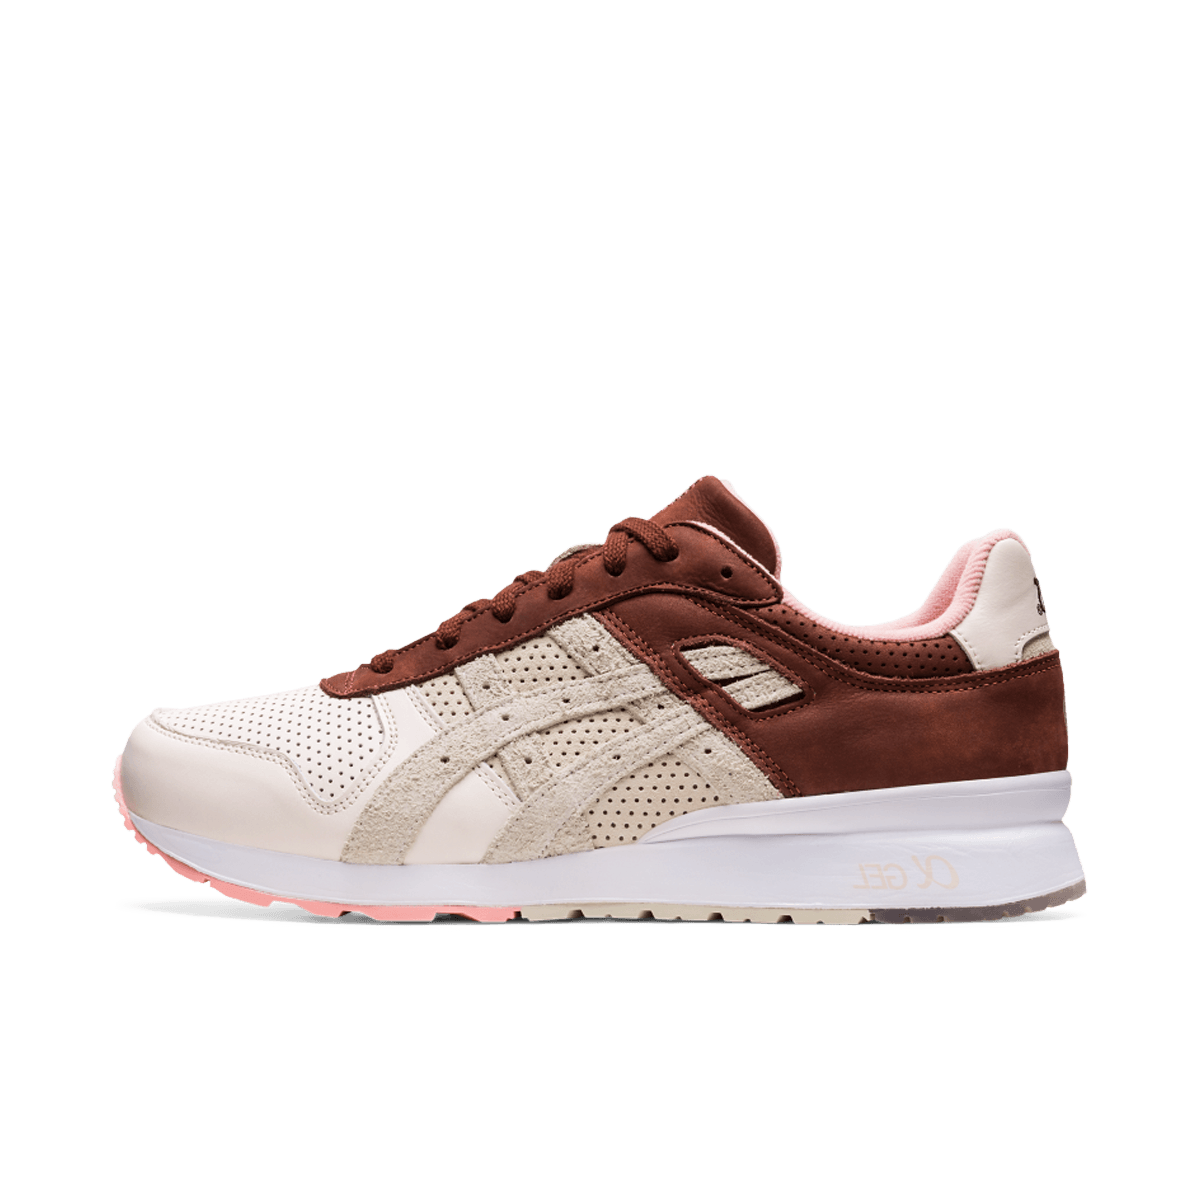 Afew x Asics GT-II 'Chocolate Brown' - Uplifting Pack 1201A480.700